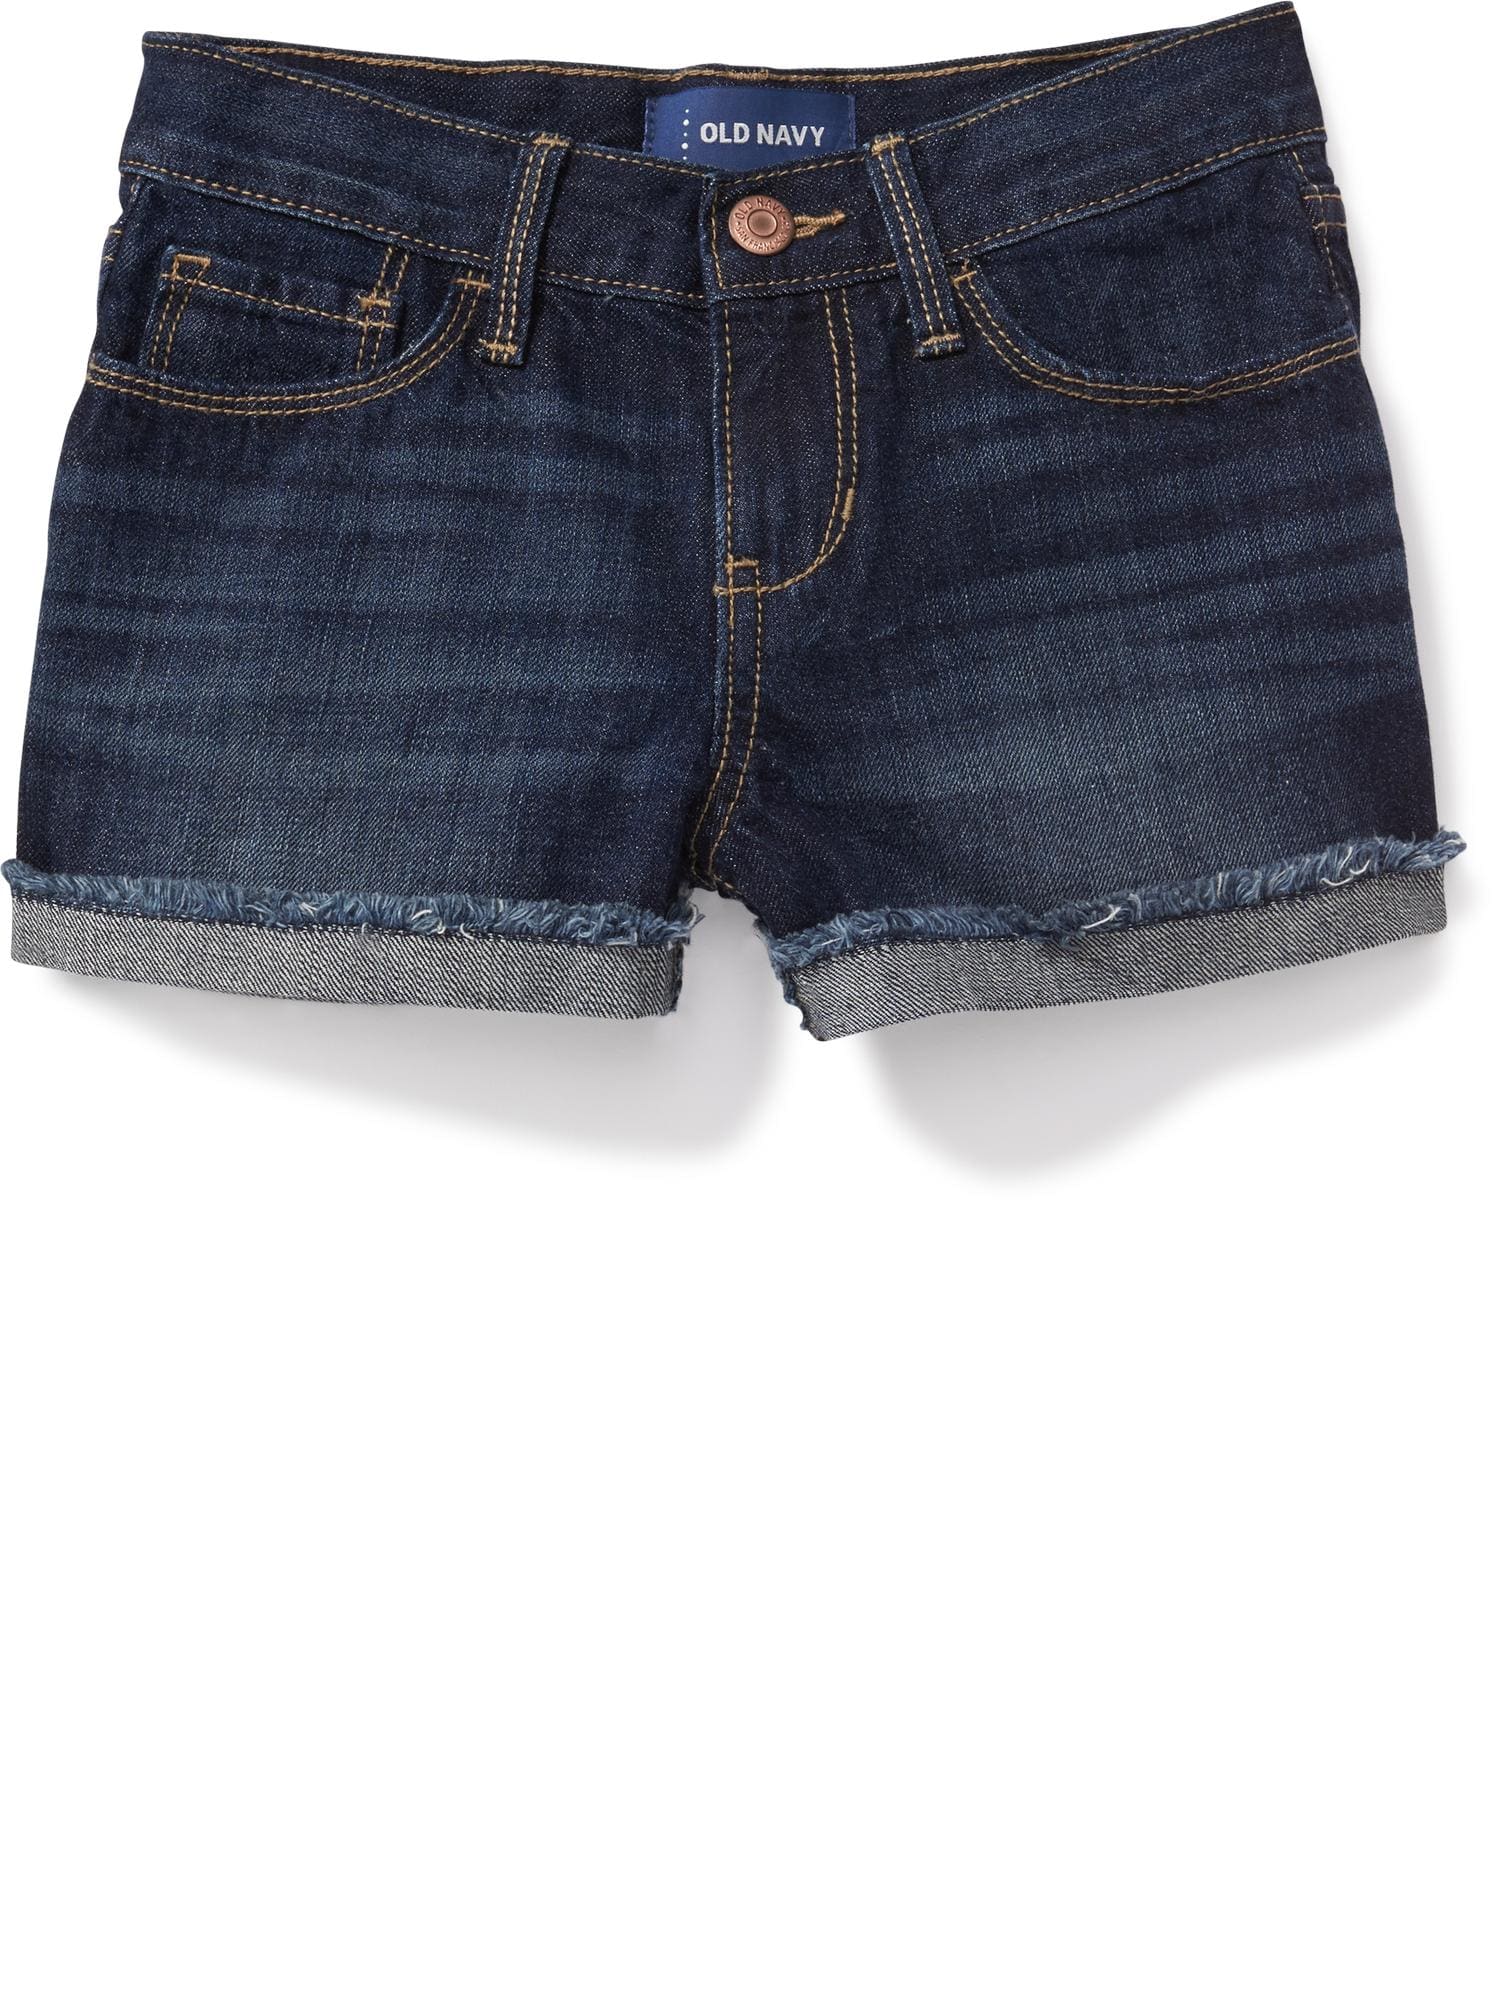 Rolled-Cuff Jean Cut-Off Shorts for Girls